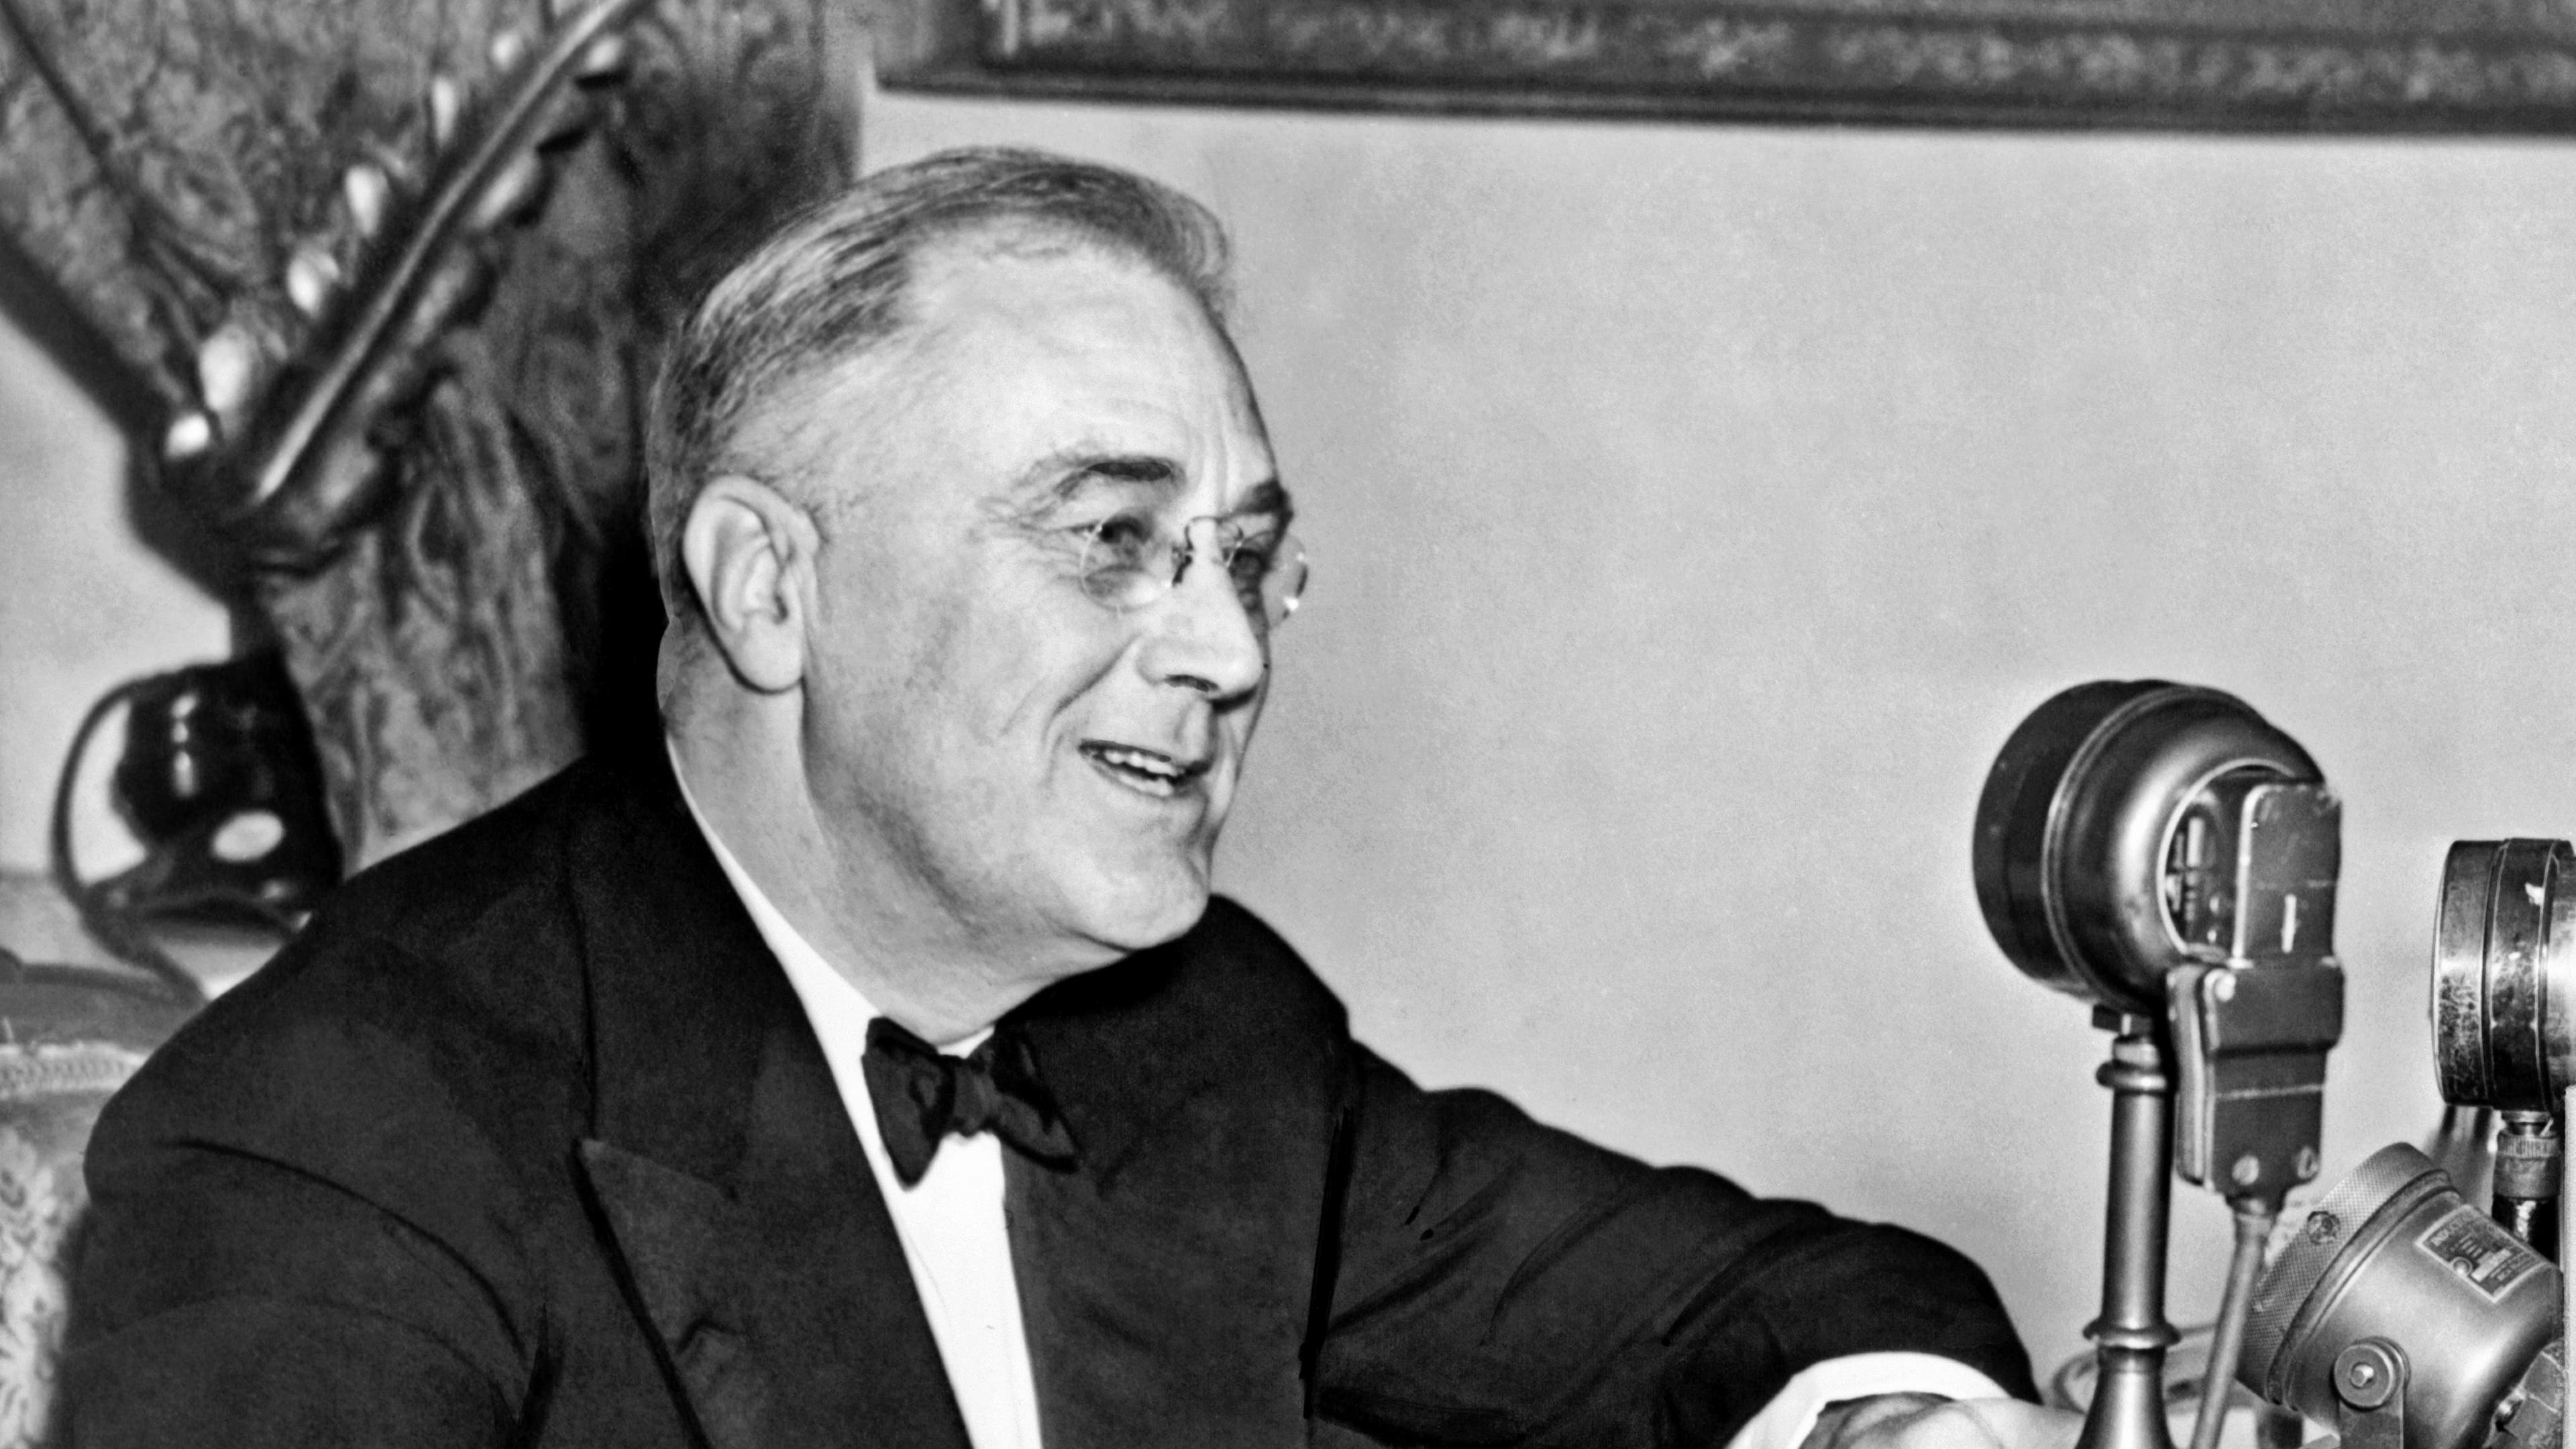 Franklin D. Roosevelt seated behind a microphone